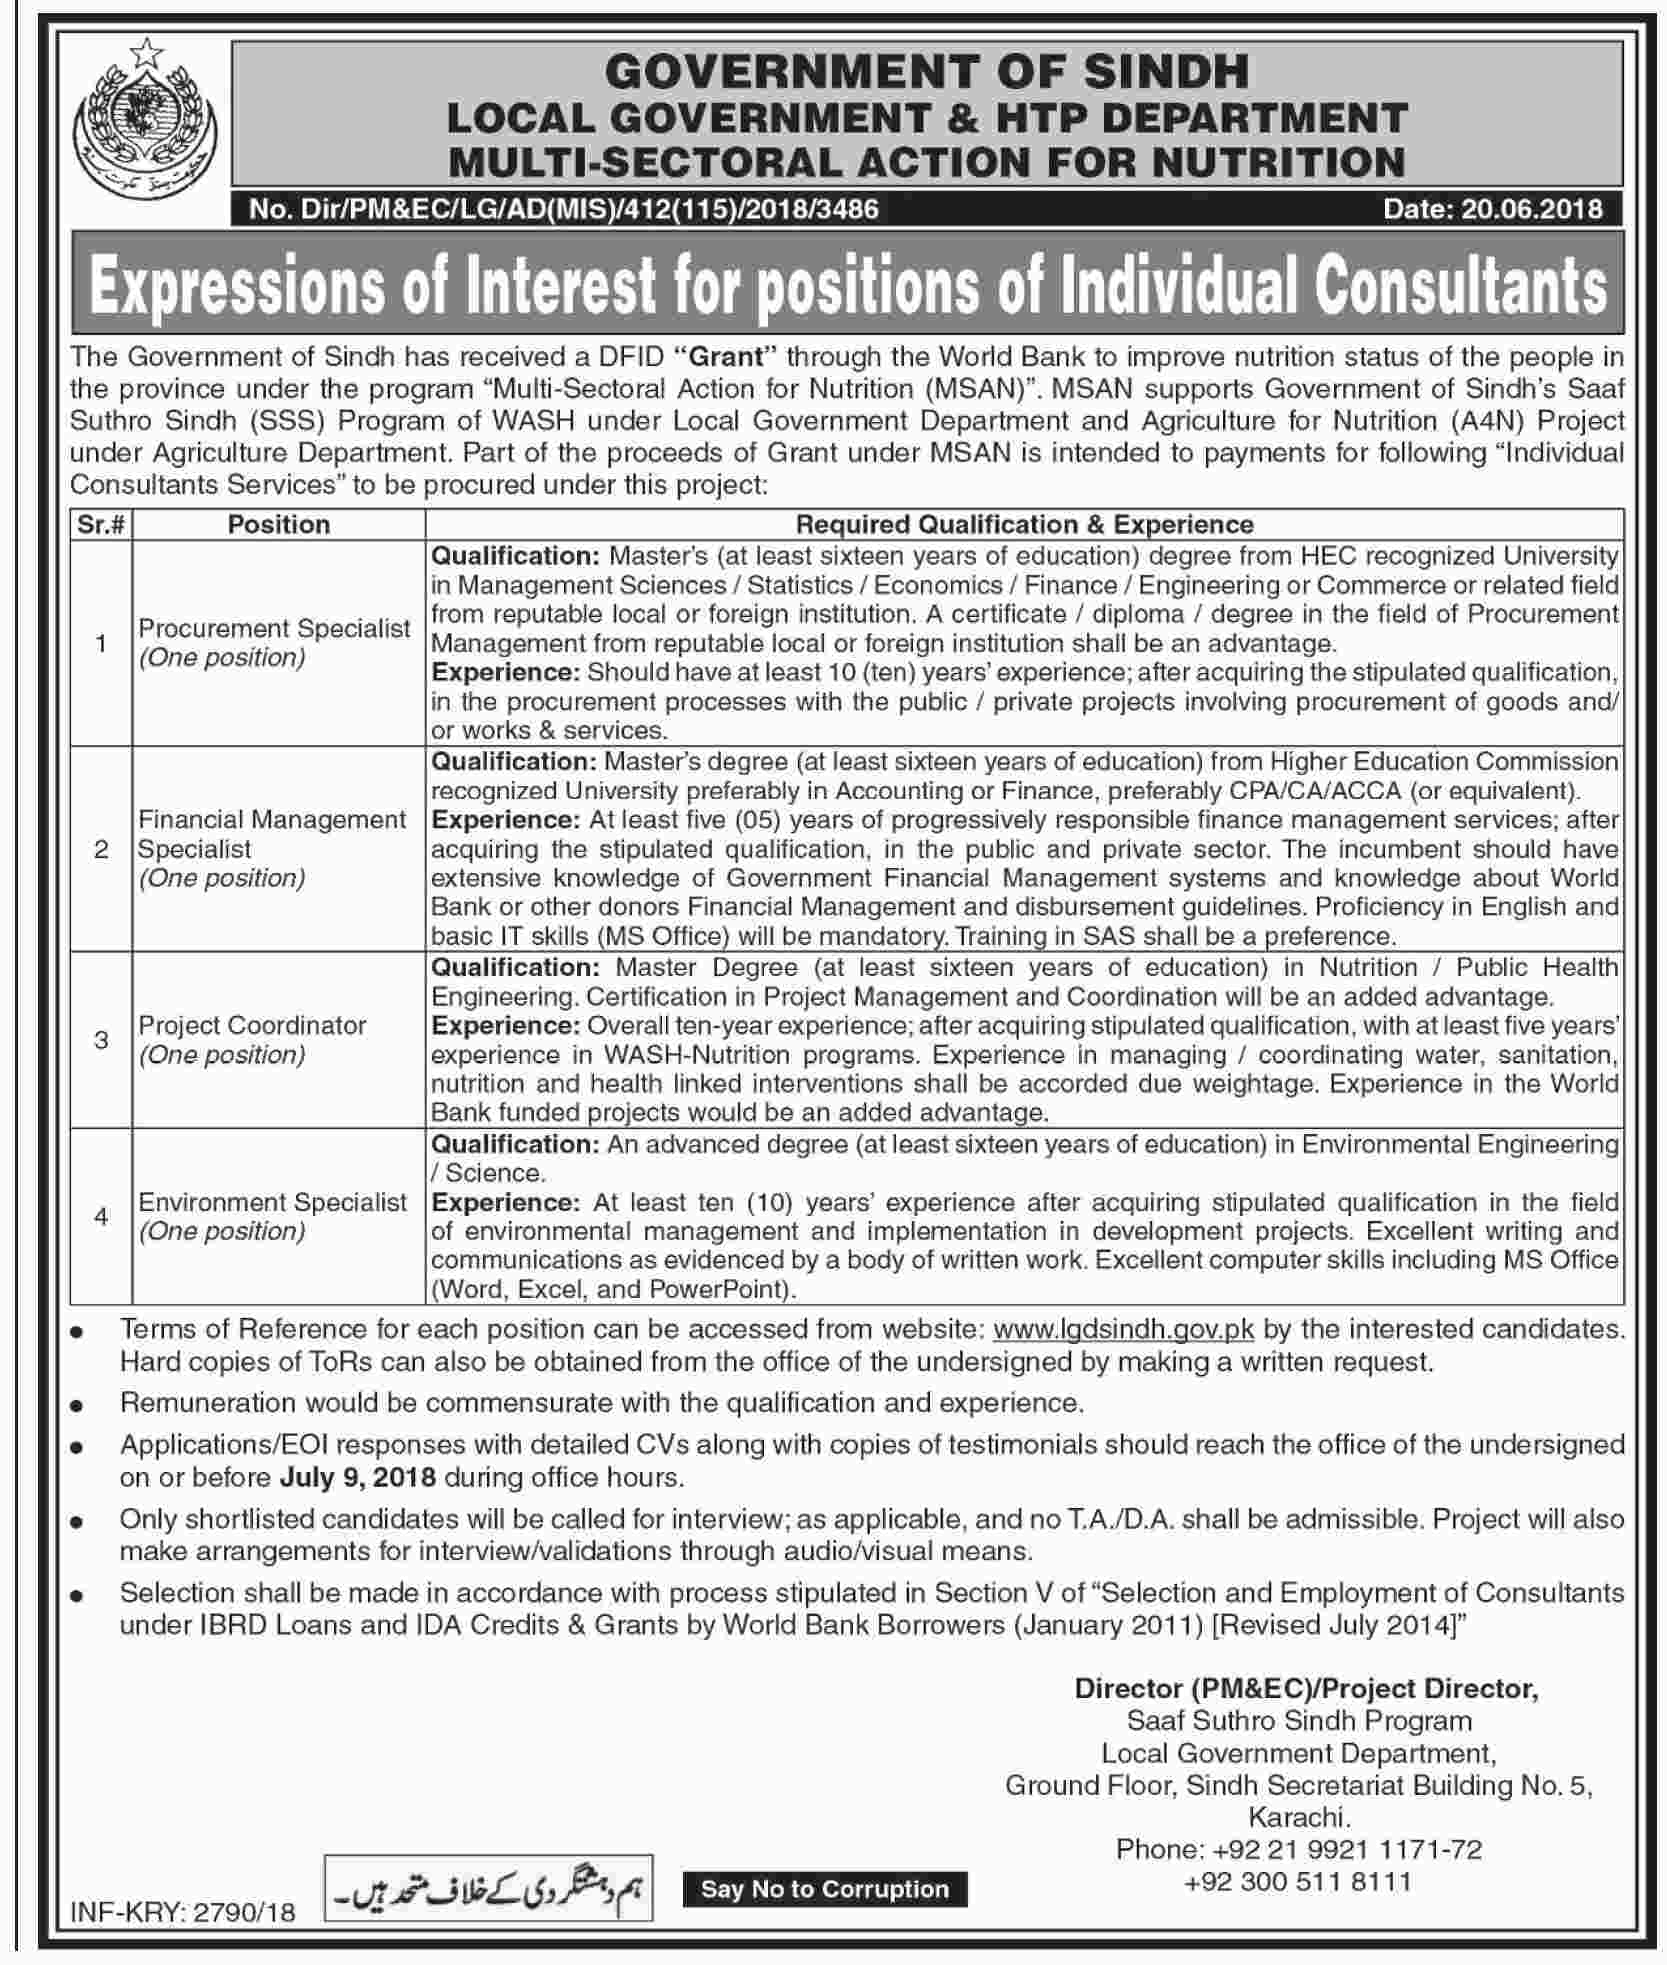 Local Govt And HTP Department Govt Of Sindh 4+ Jobs For Procurement Specialist, Financial Management Specialist & Others